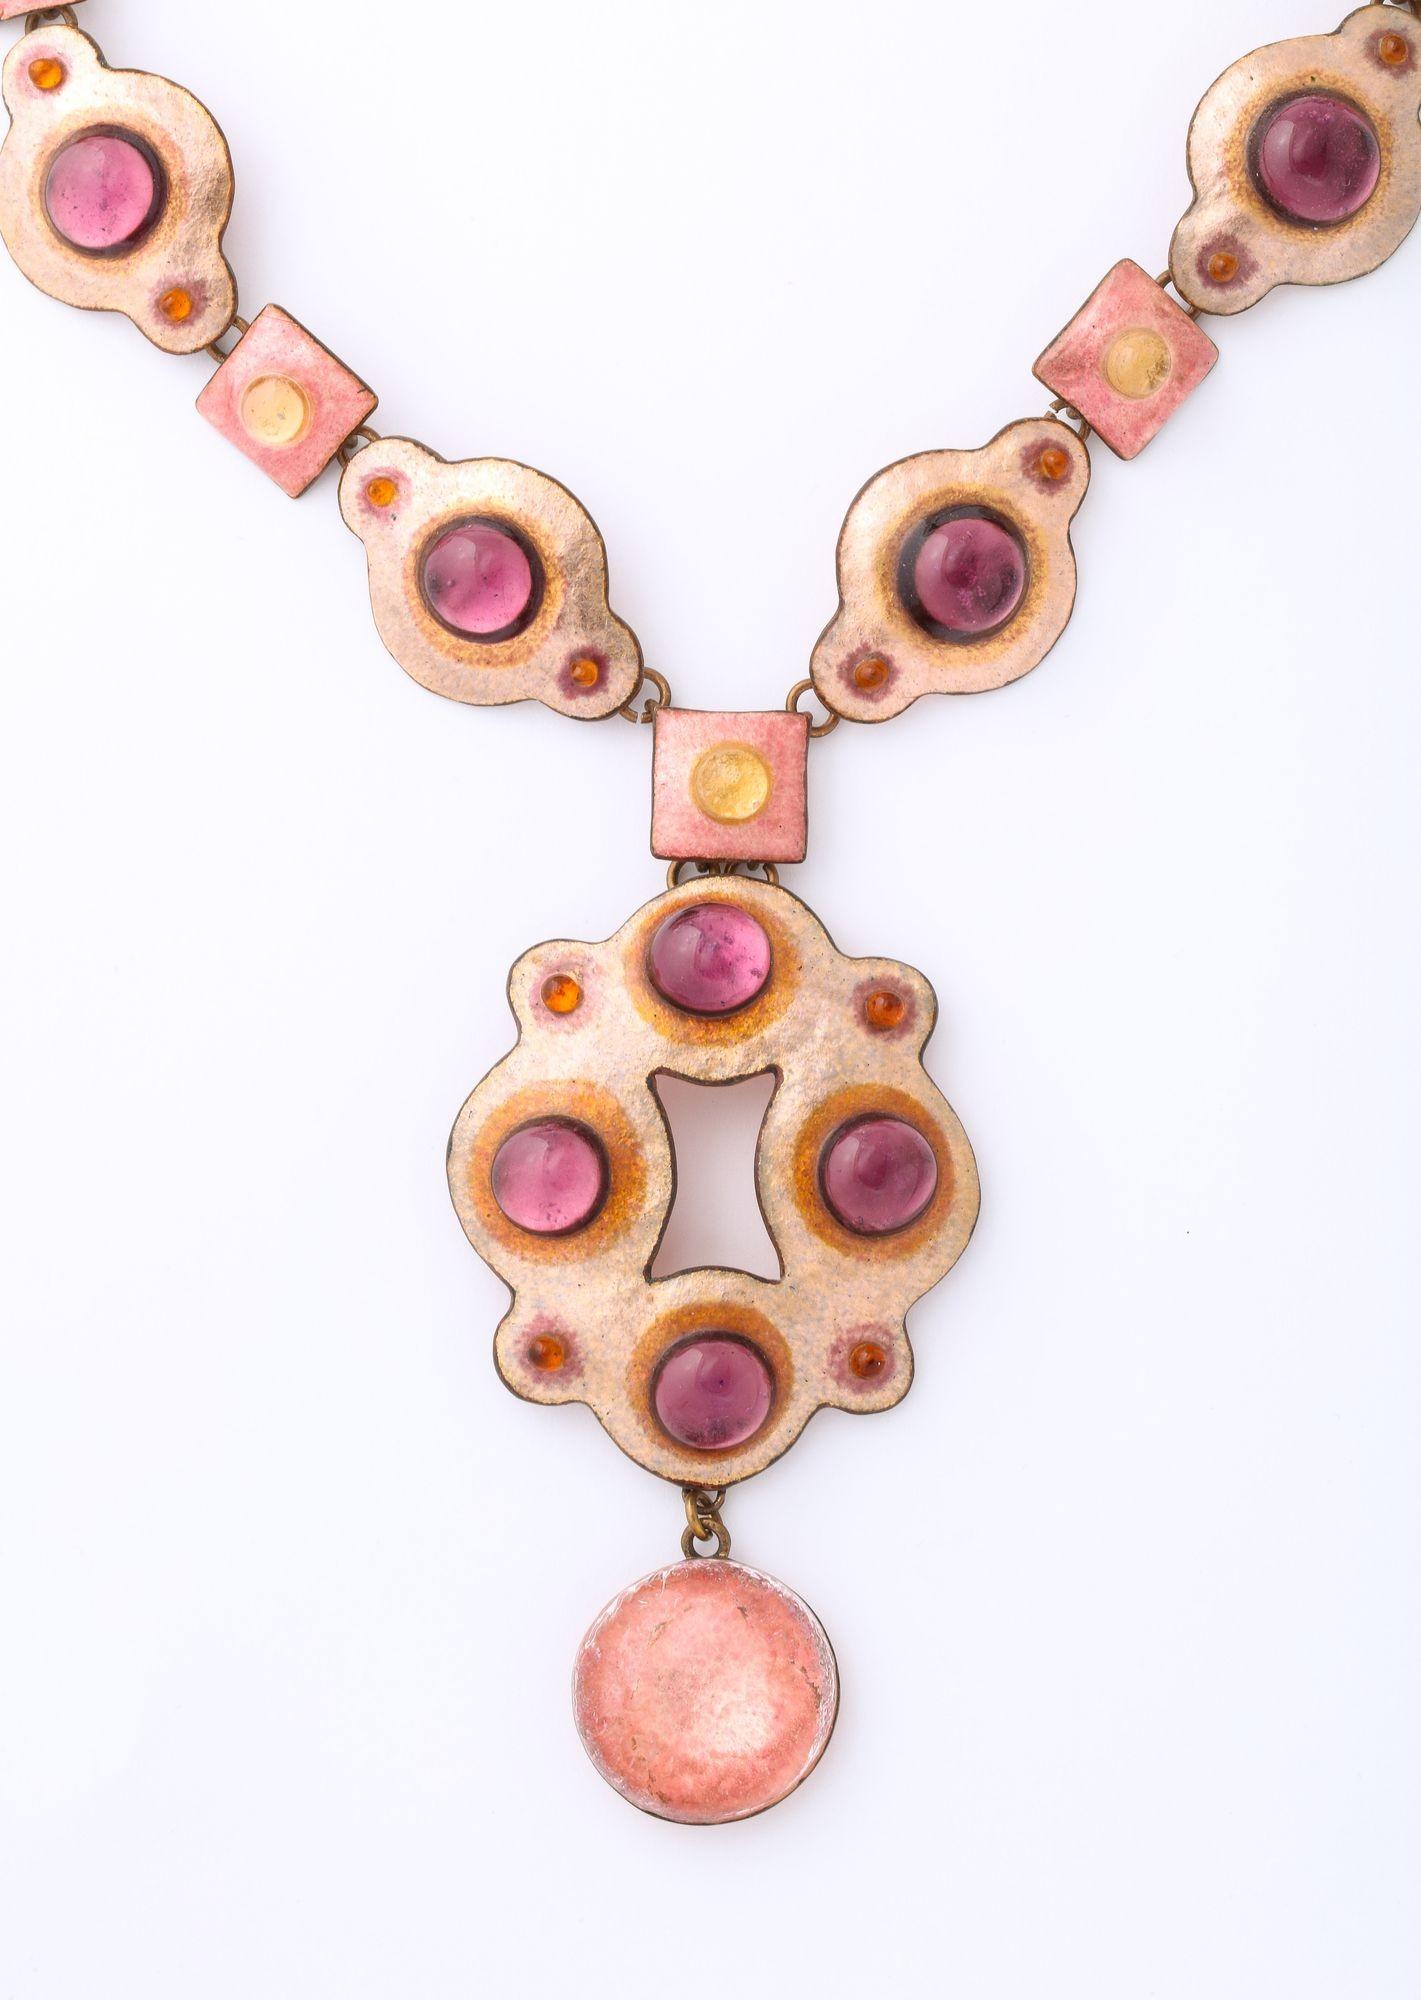 A wonderful work on copper and then enamelled and fired. Loutzia was wll known in the 60s/70s for her sought after jewelry designs.